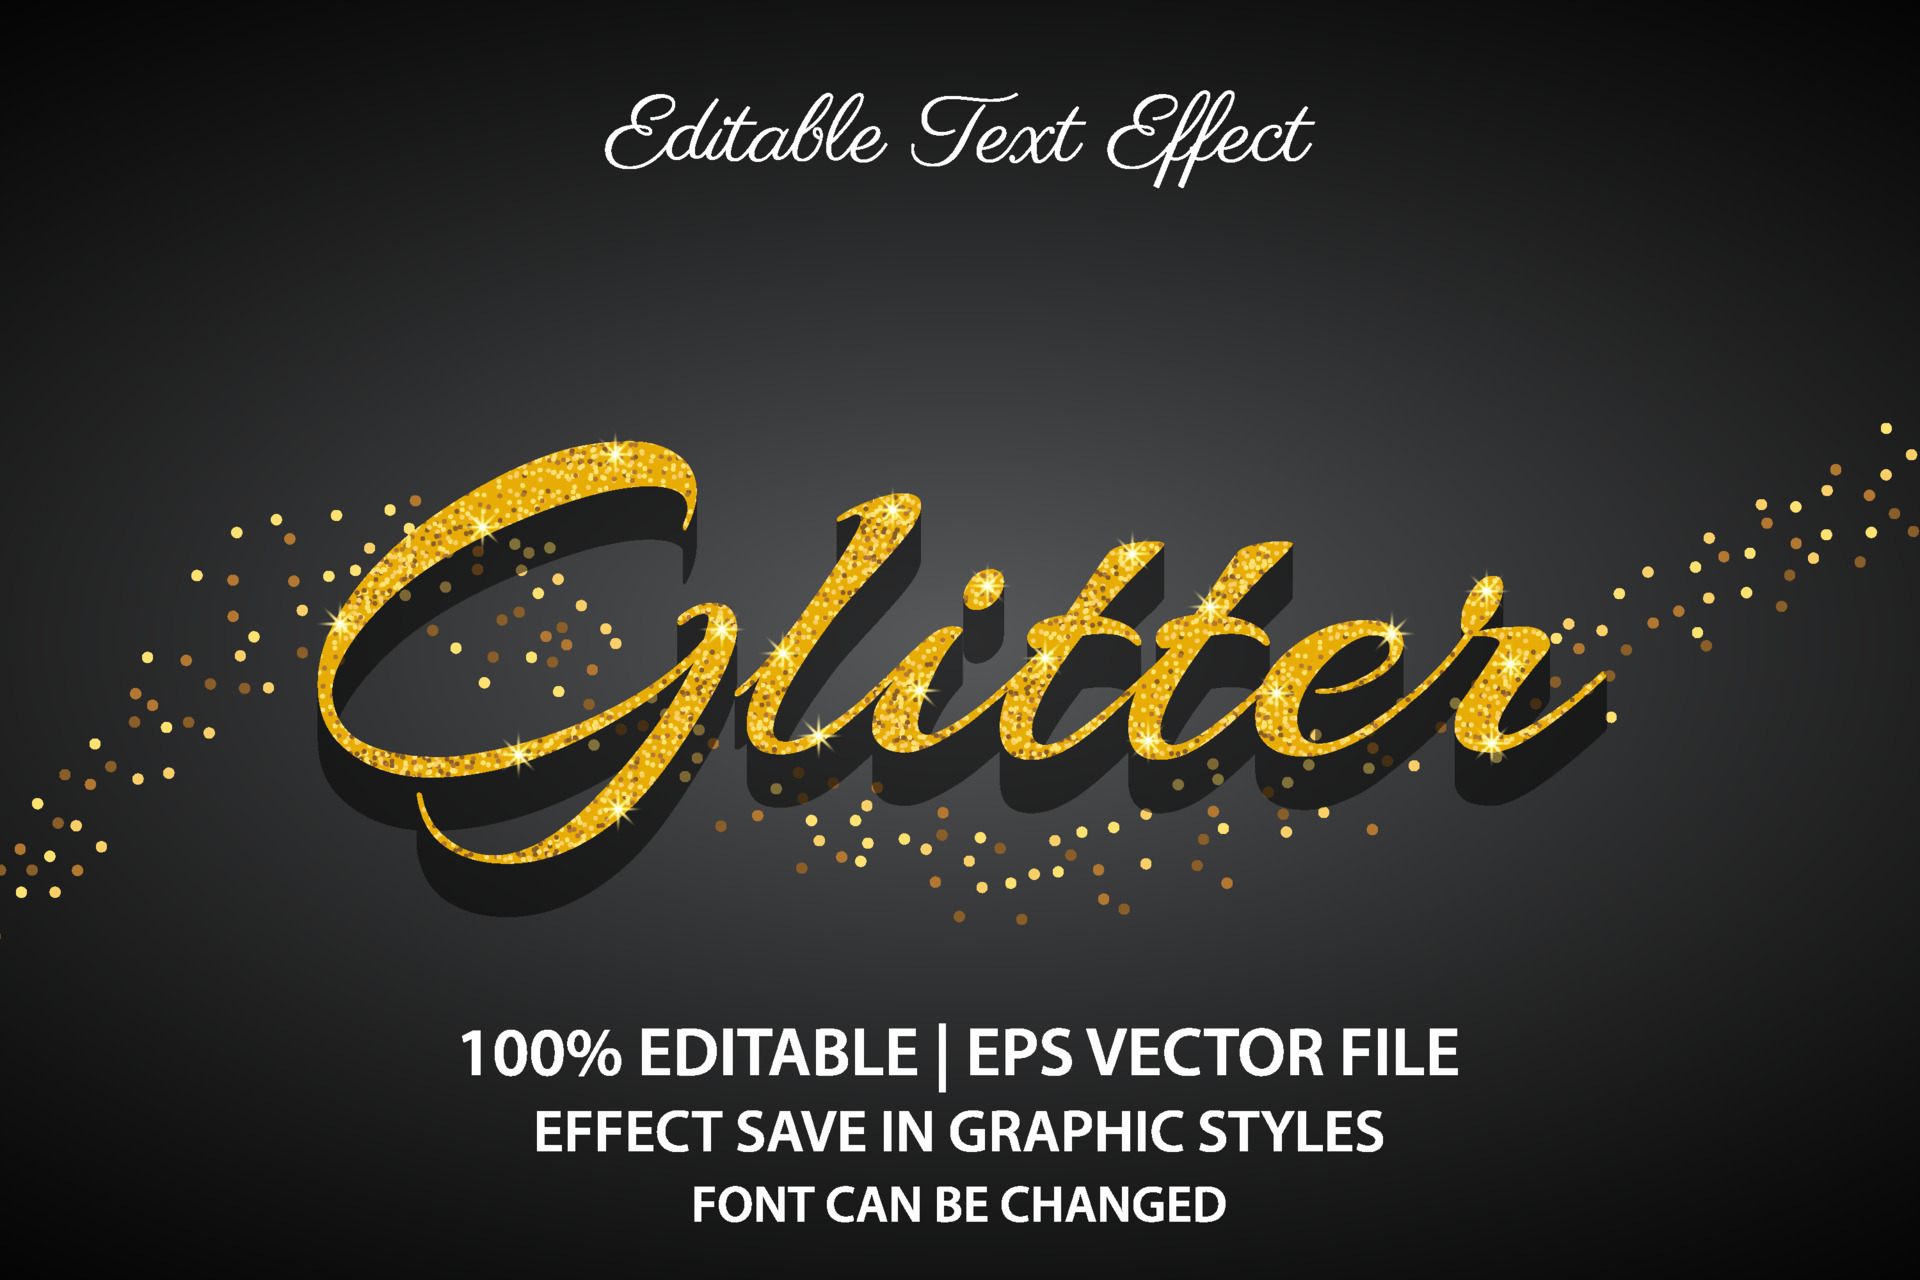 bede Lagring Kollega Glitter Text Effect Vector Art, Icons, and Graphics for Free Download